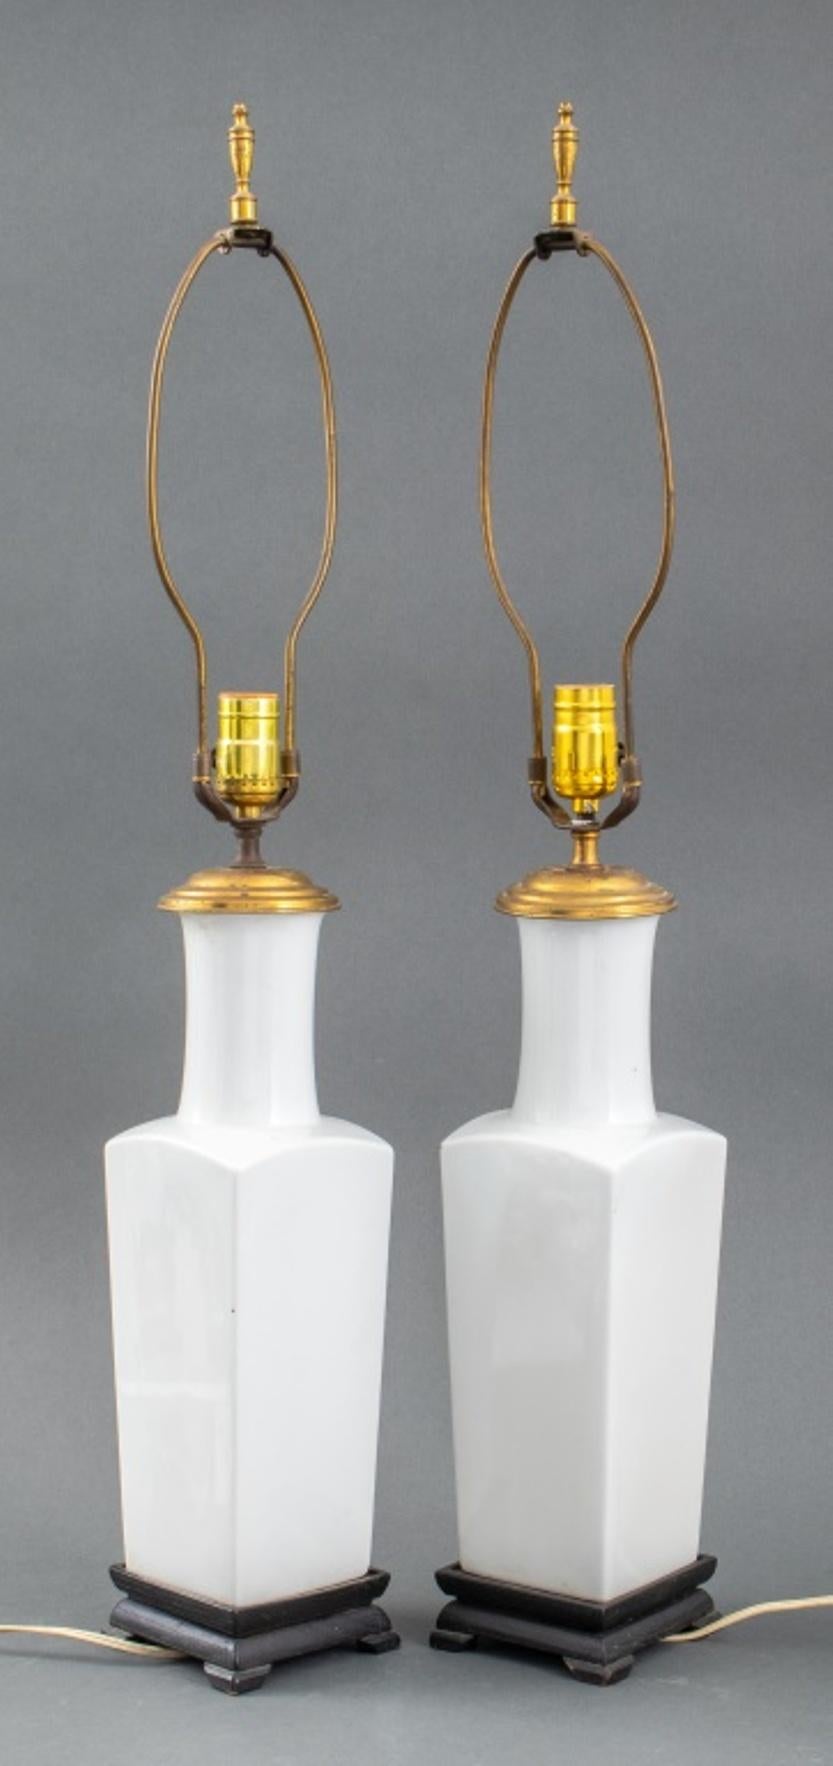 Pair of Chinese blanc de chine ceramic porcelain bottle vases mounted as lamps, the vessels with quadratic bodies and cylindrical tapered necks, mounted upon ebonized wood stands. Each: 32.25